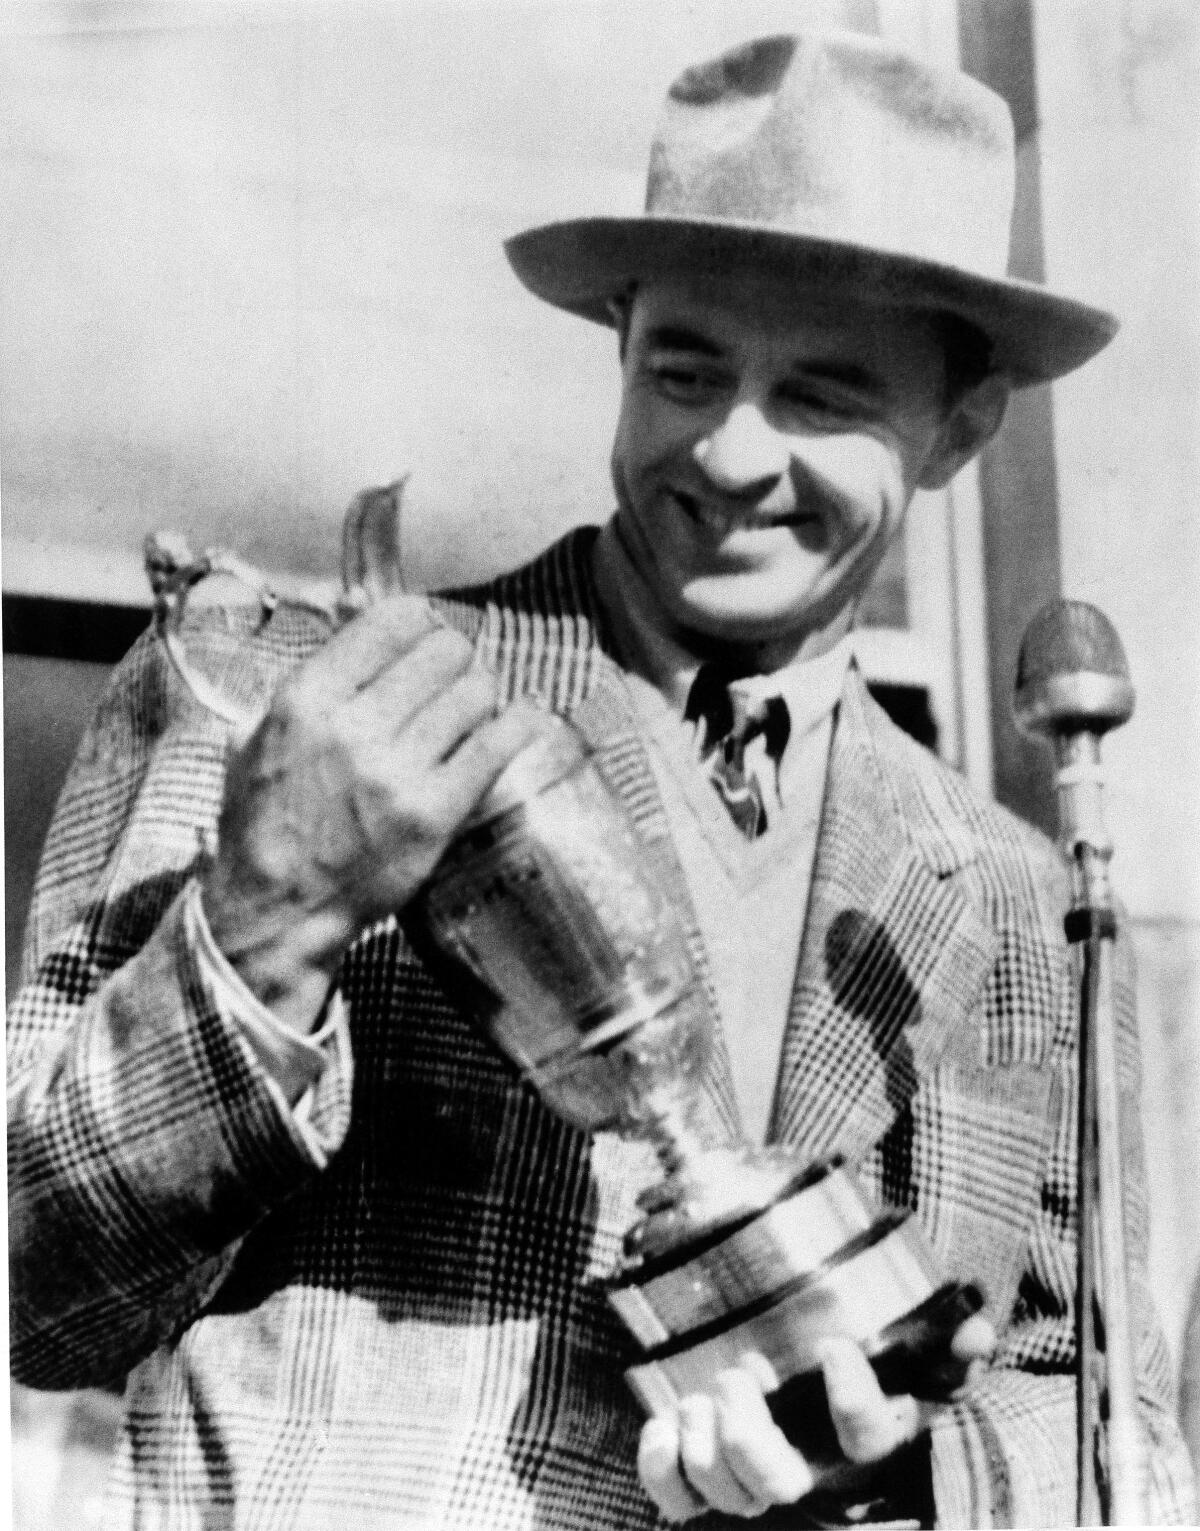 FILE - Sam Snead holds the British Open trophy he won, July 5, 1946, at St. Andrews, Scotland, with a 72-hole score of 290. He was the first American to win the trophy since 1933. (AP Photo, File)